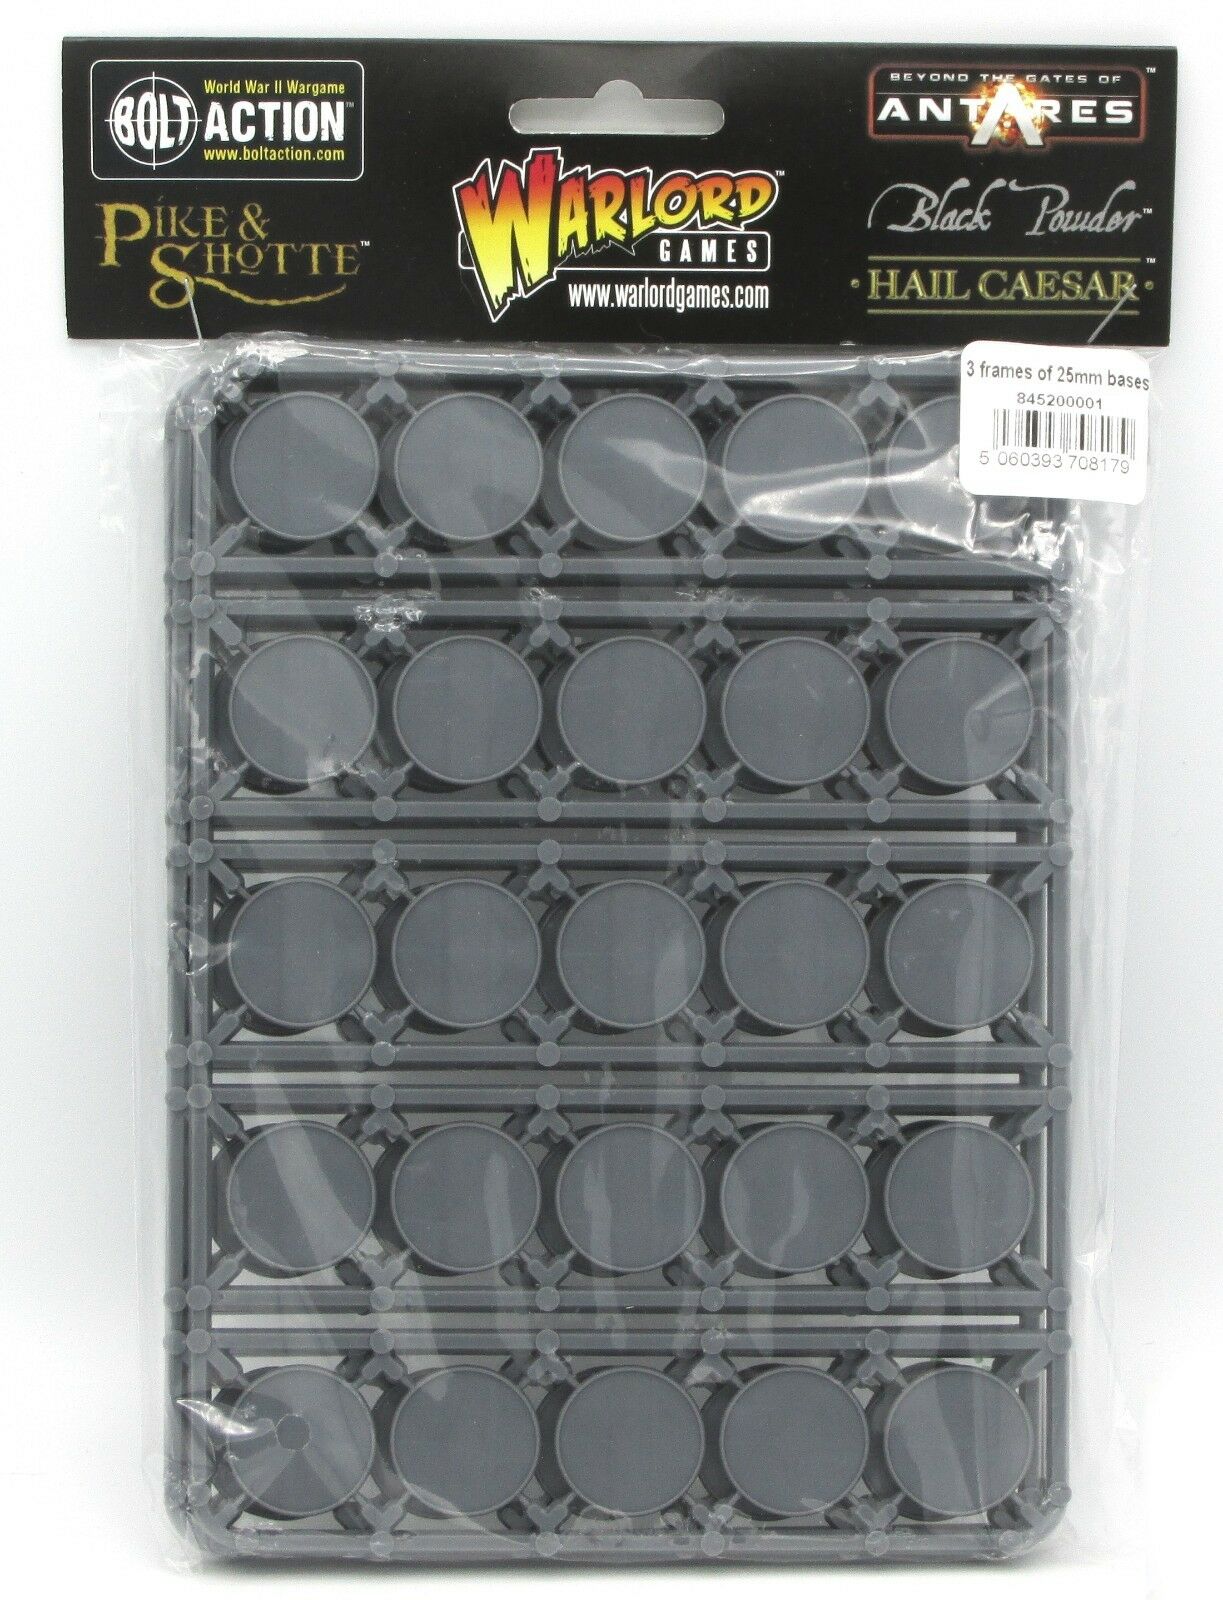 Warlord Games 845200001 3 Frames Of 25mm Bases (75 Round Plastic) Bolt Action